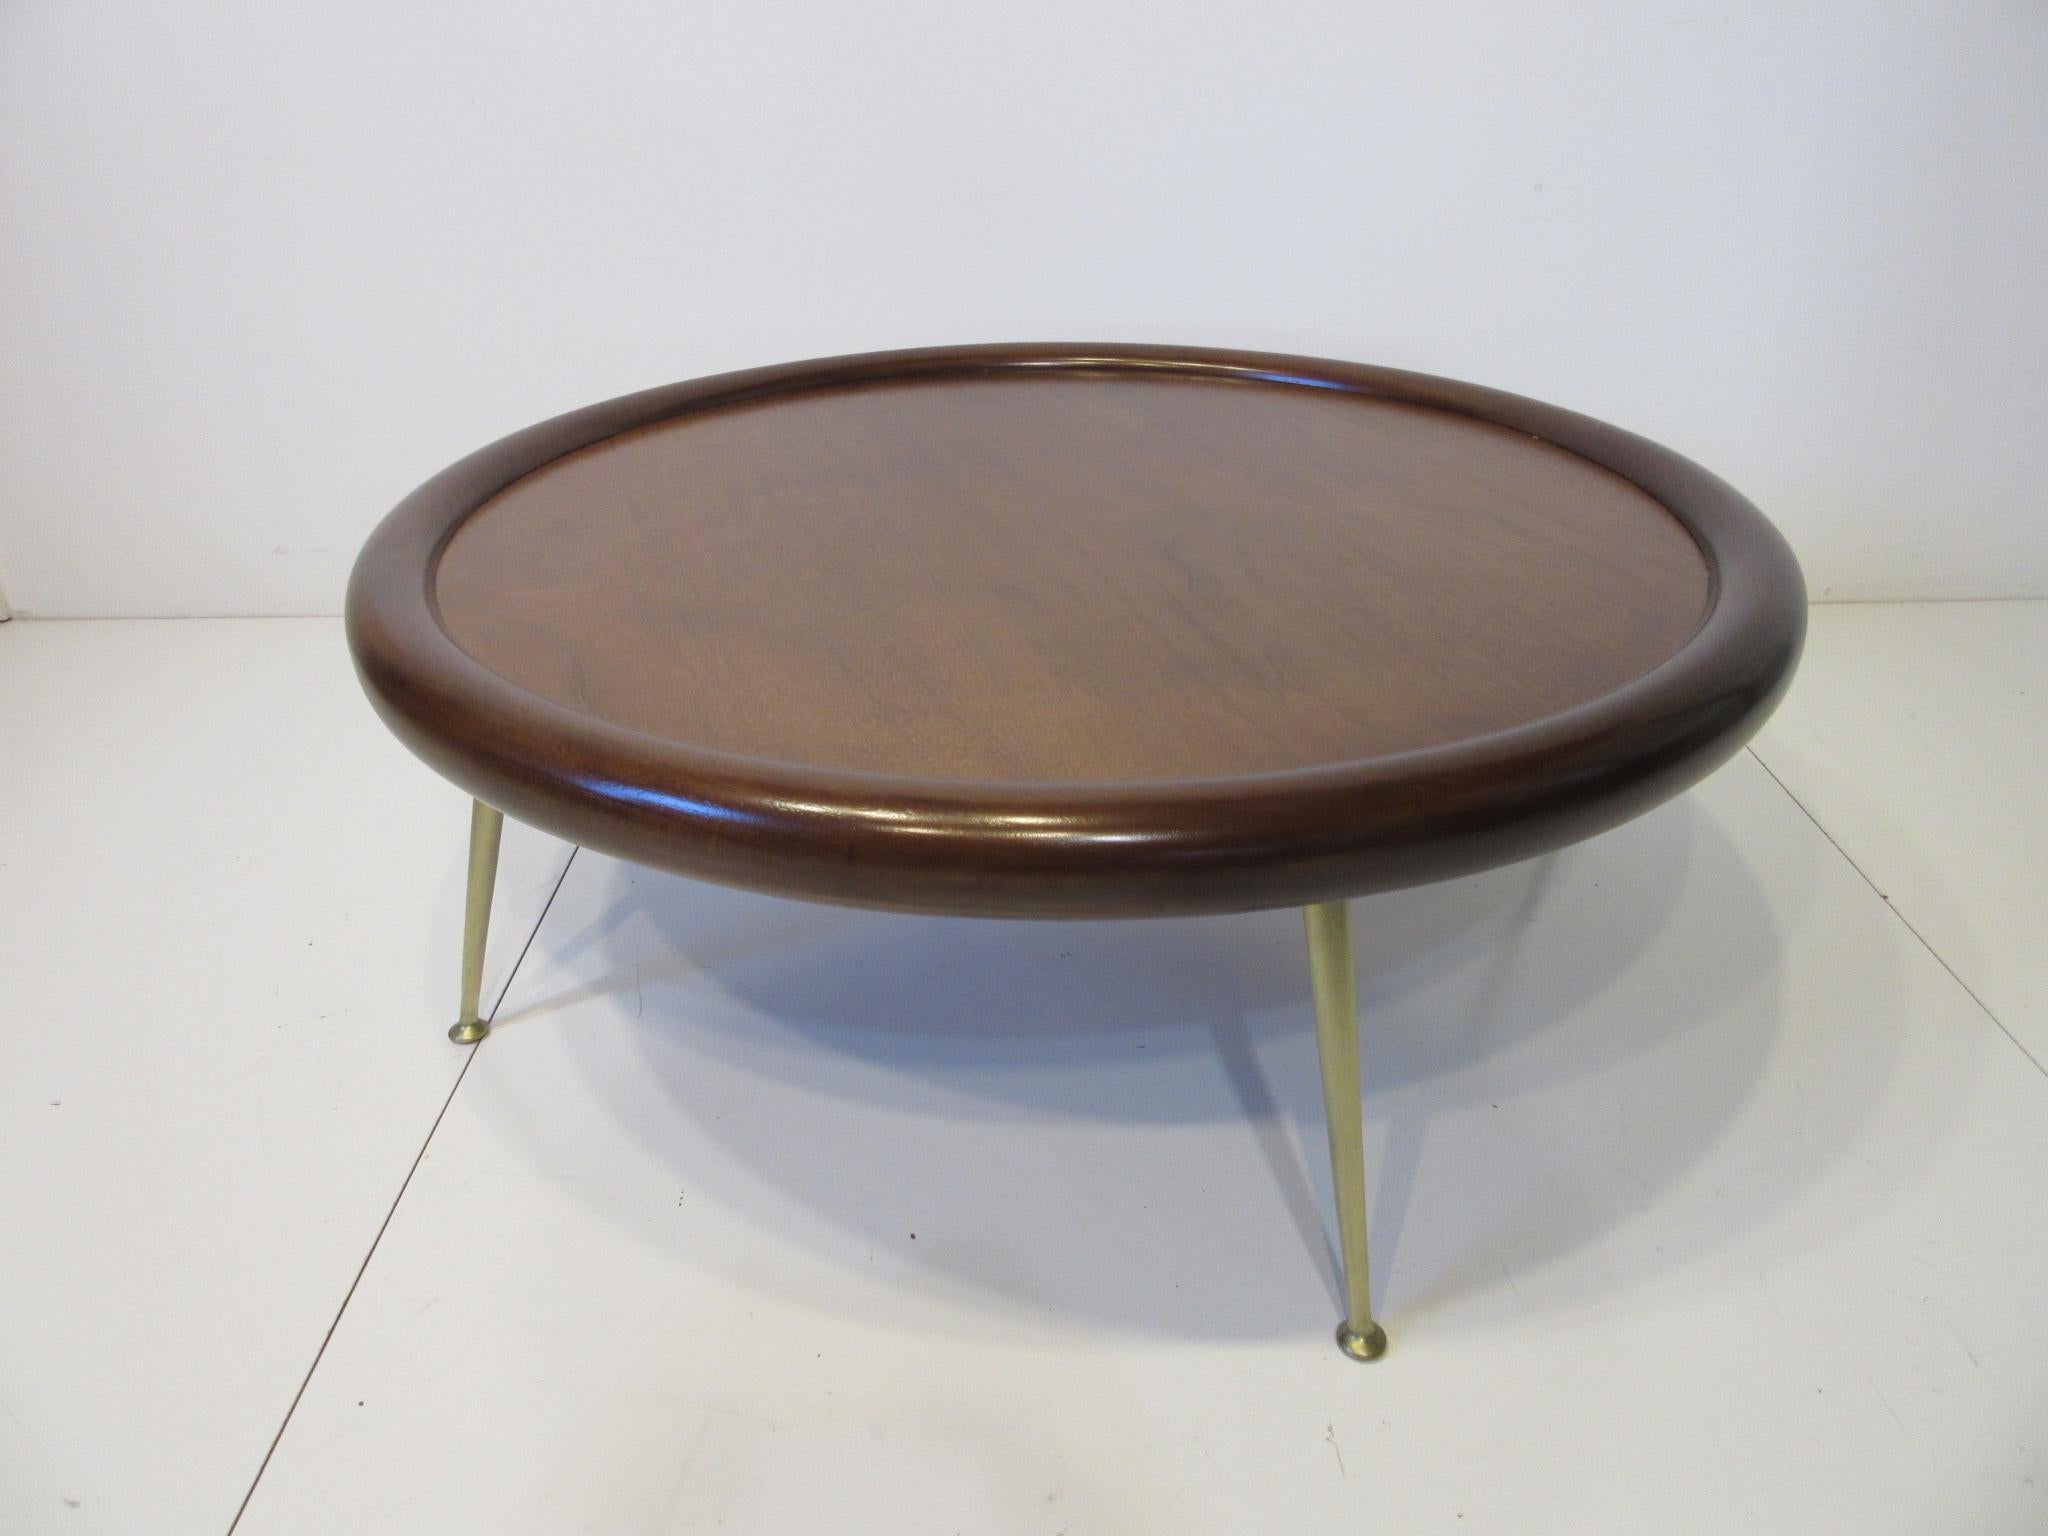 A rare well crafted and beautiful round coffee table with lighter toned walnut inner surface and darker toned walnut bull nose edge sitting on cast polished brass legs. Retains the manufactures label to the bottom by the Widdicomb Furniture Company